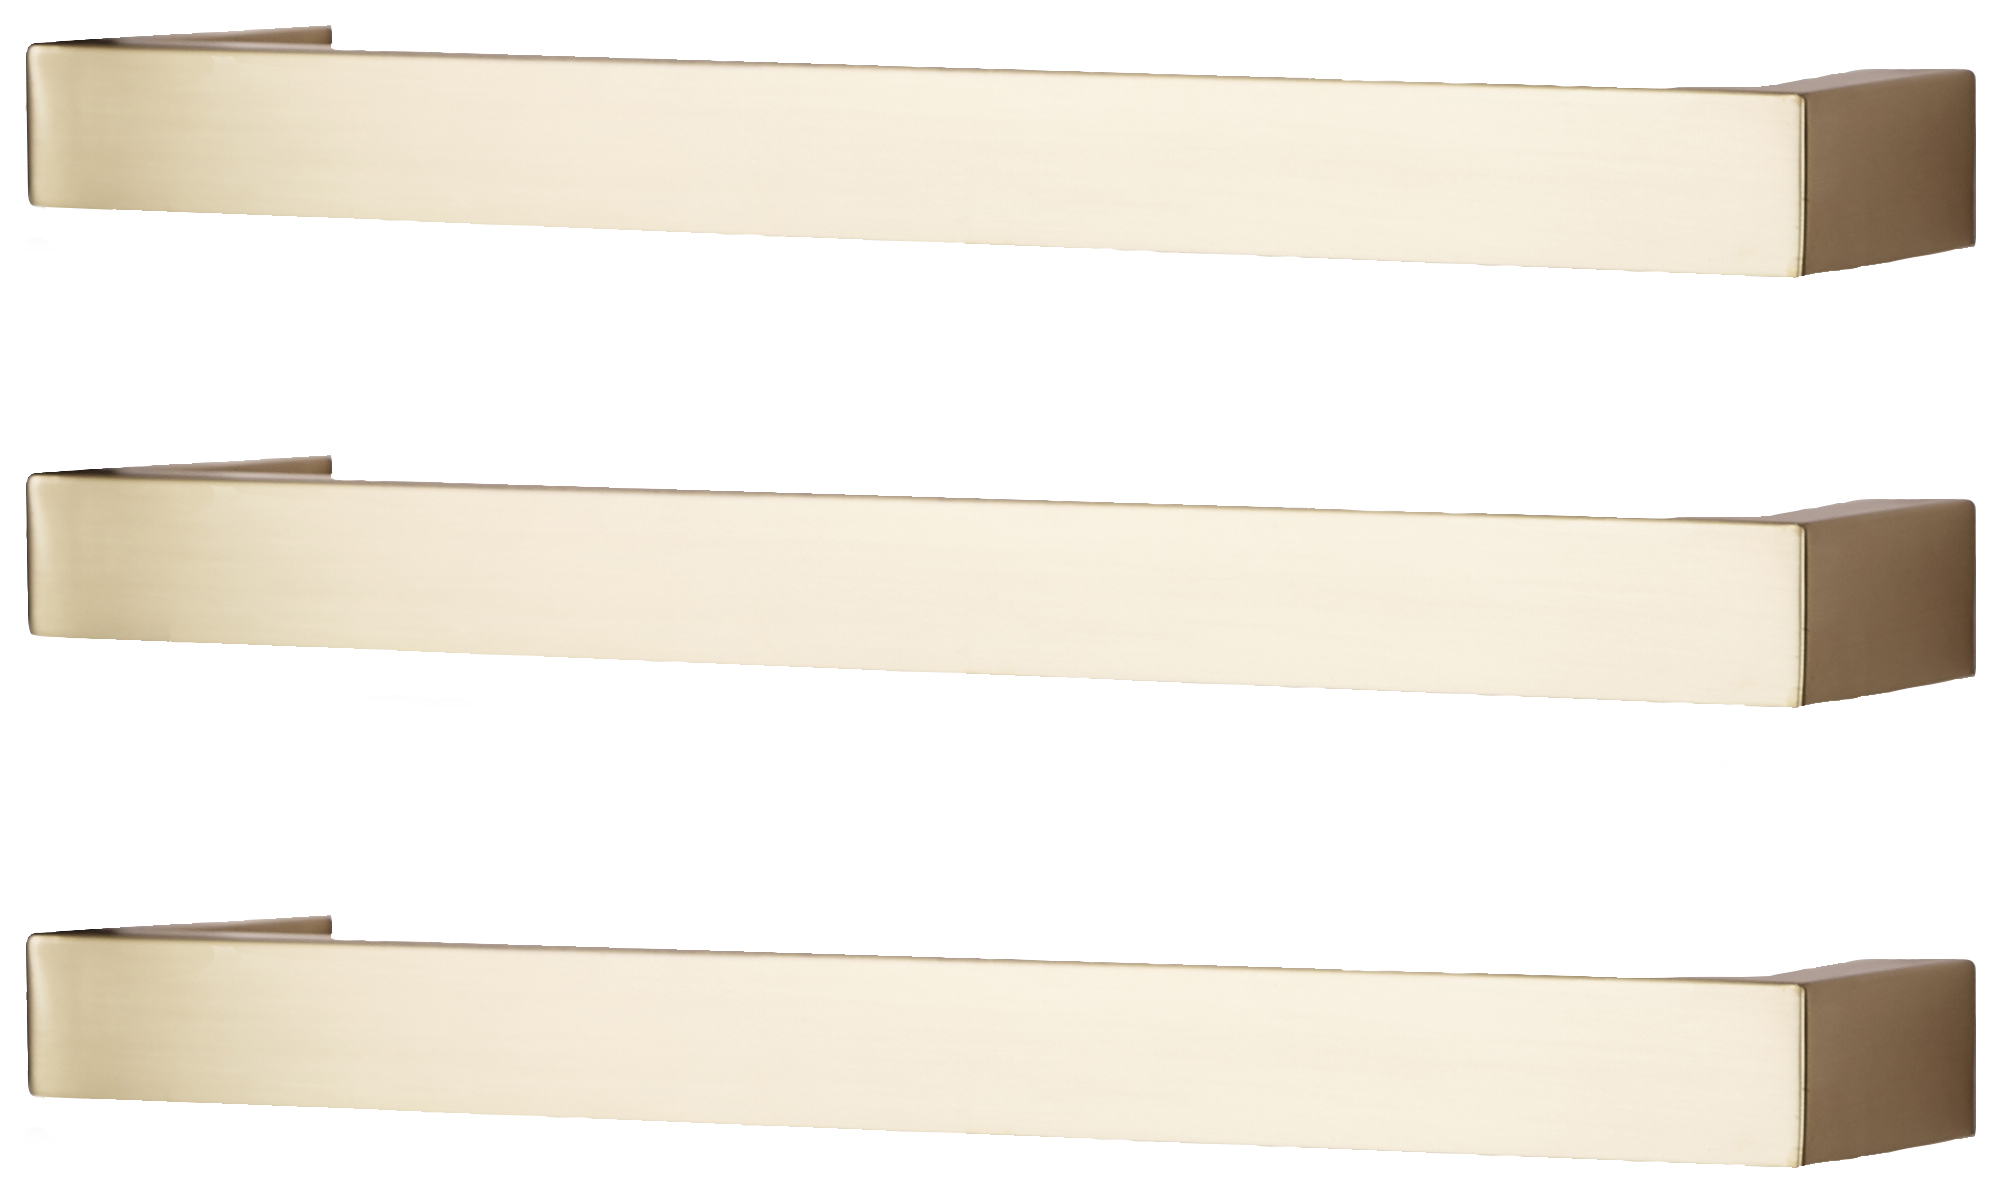 Towelrads Elcot Brushed Brass Dry Electric Towel Bars - 450mm